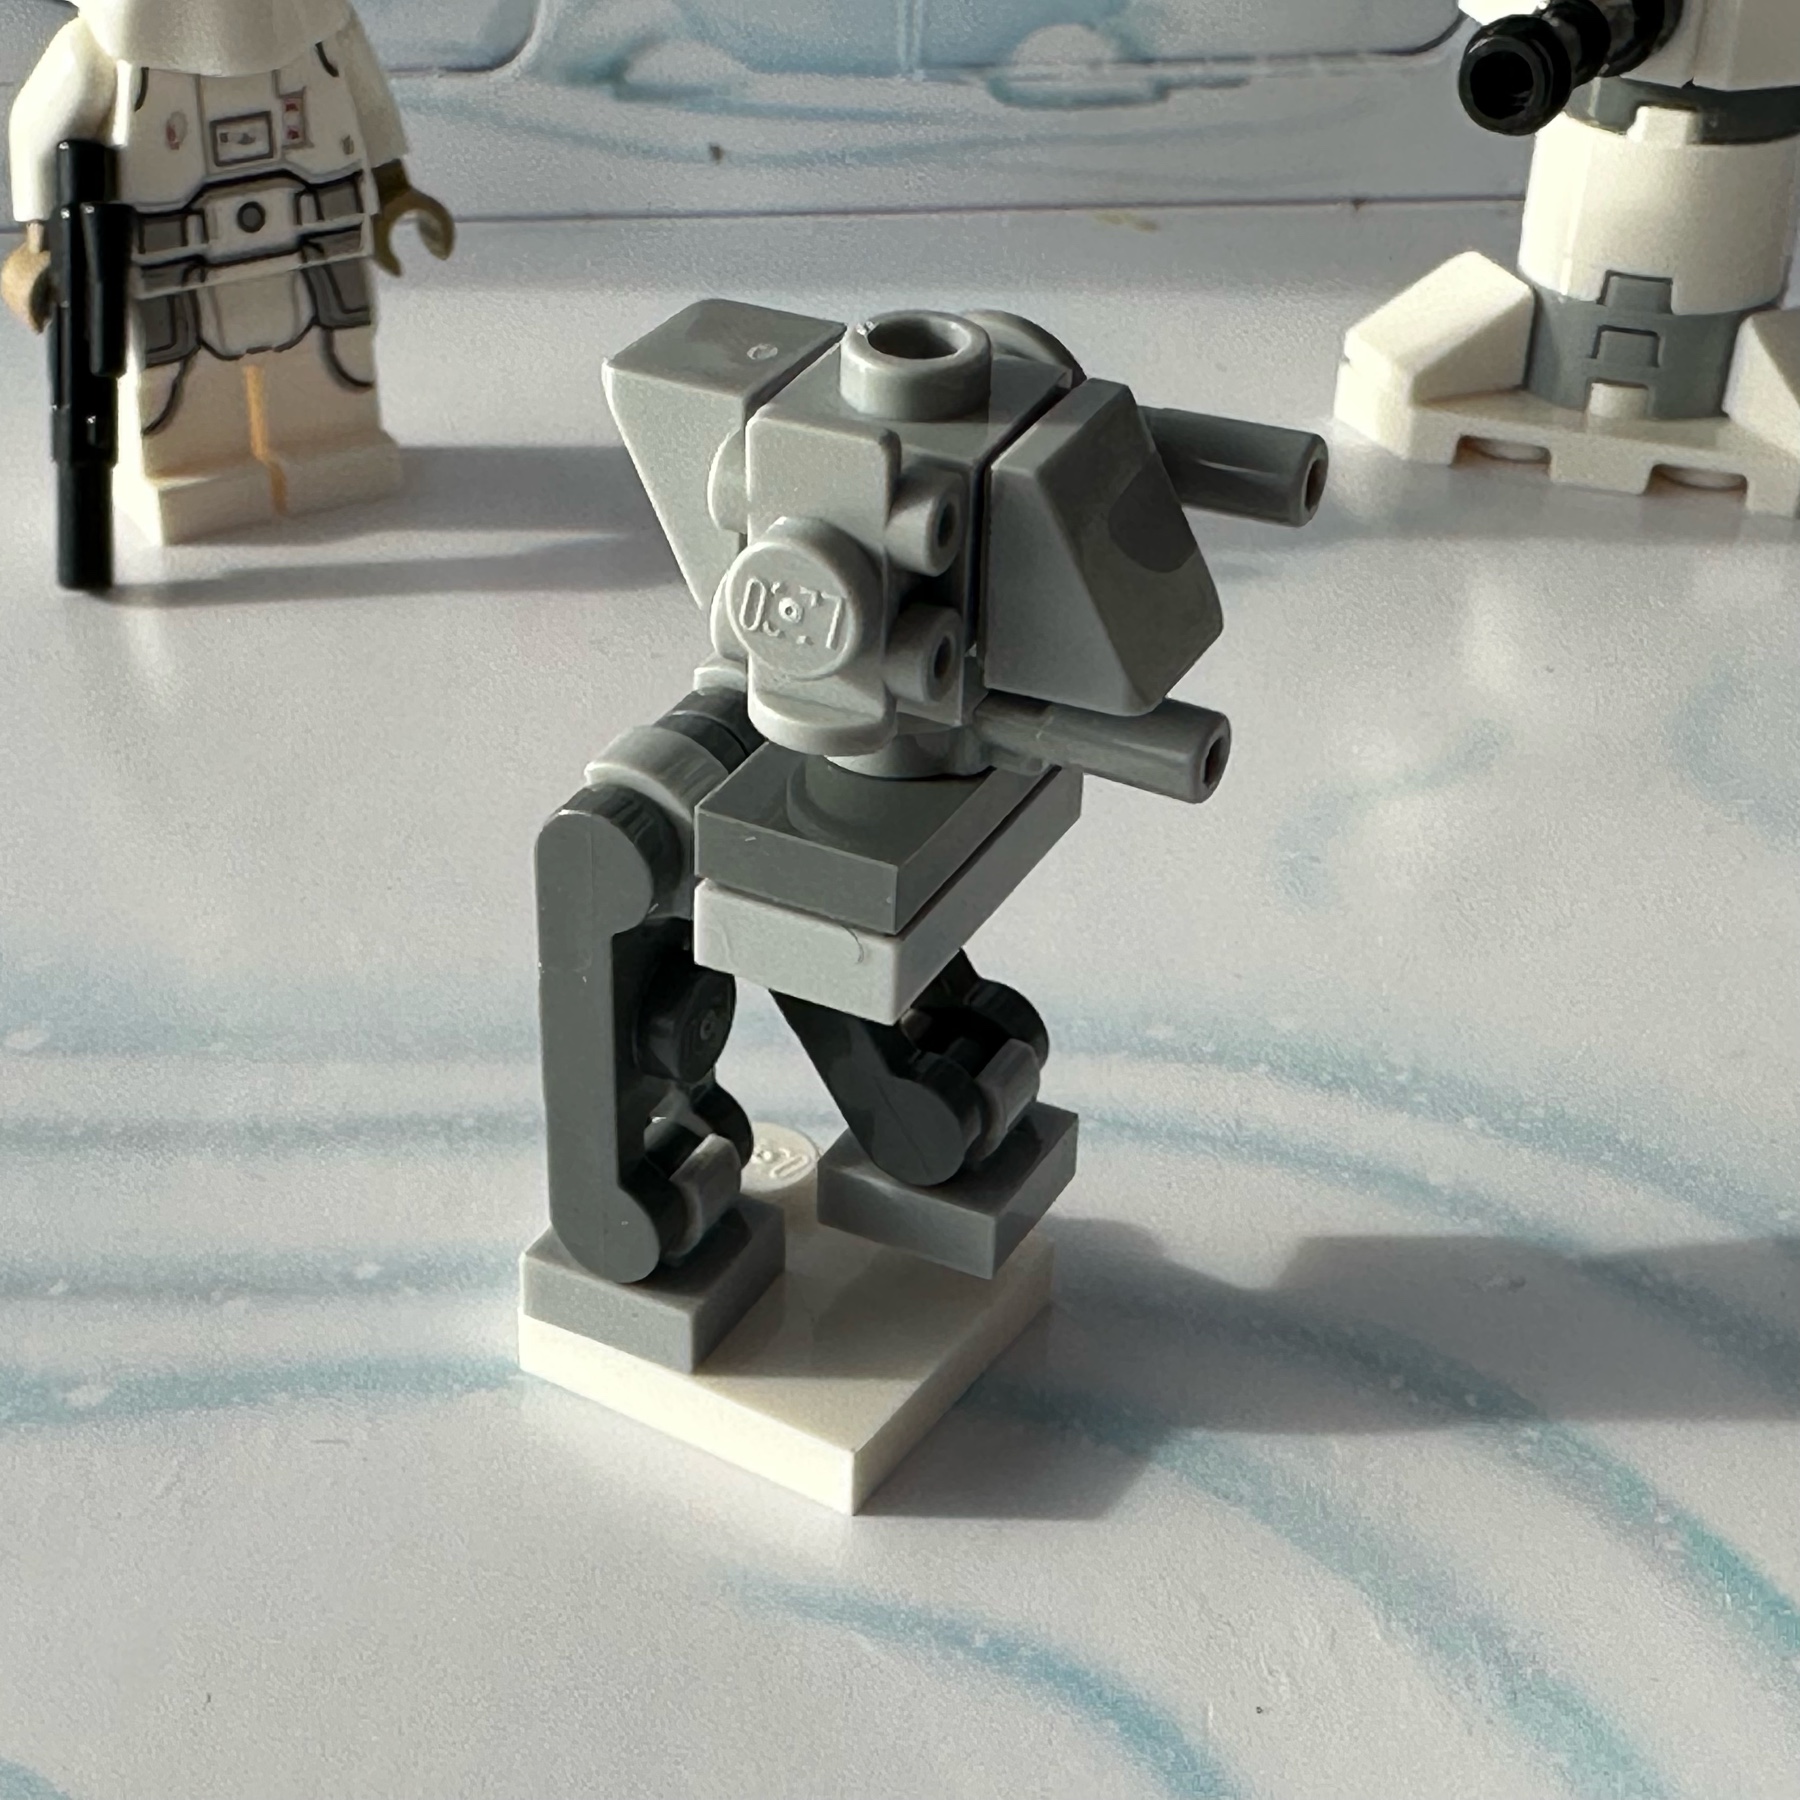 Another angle of a LEGO microscale build of an AT-ST walker from Star Wars